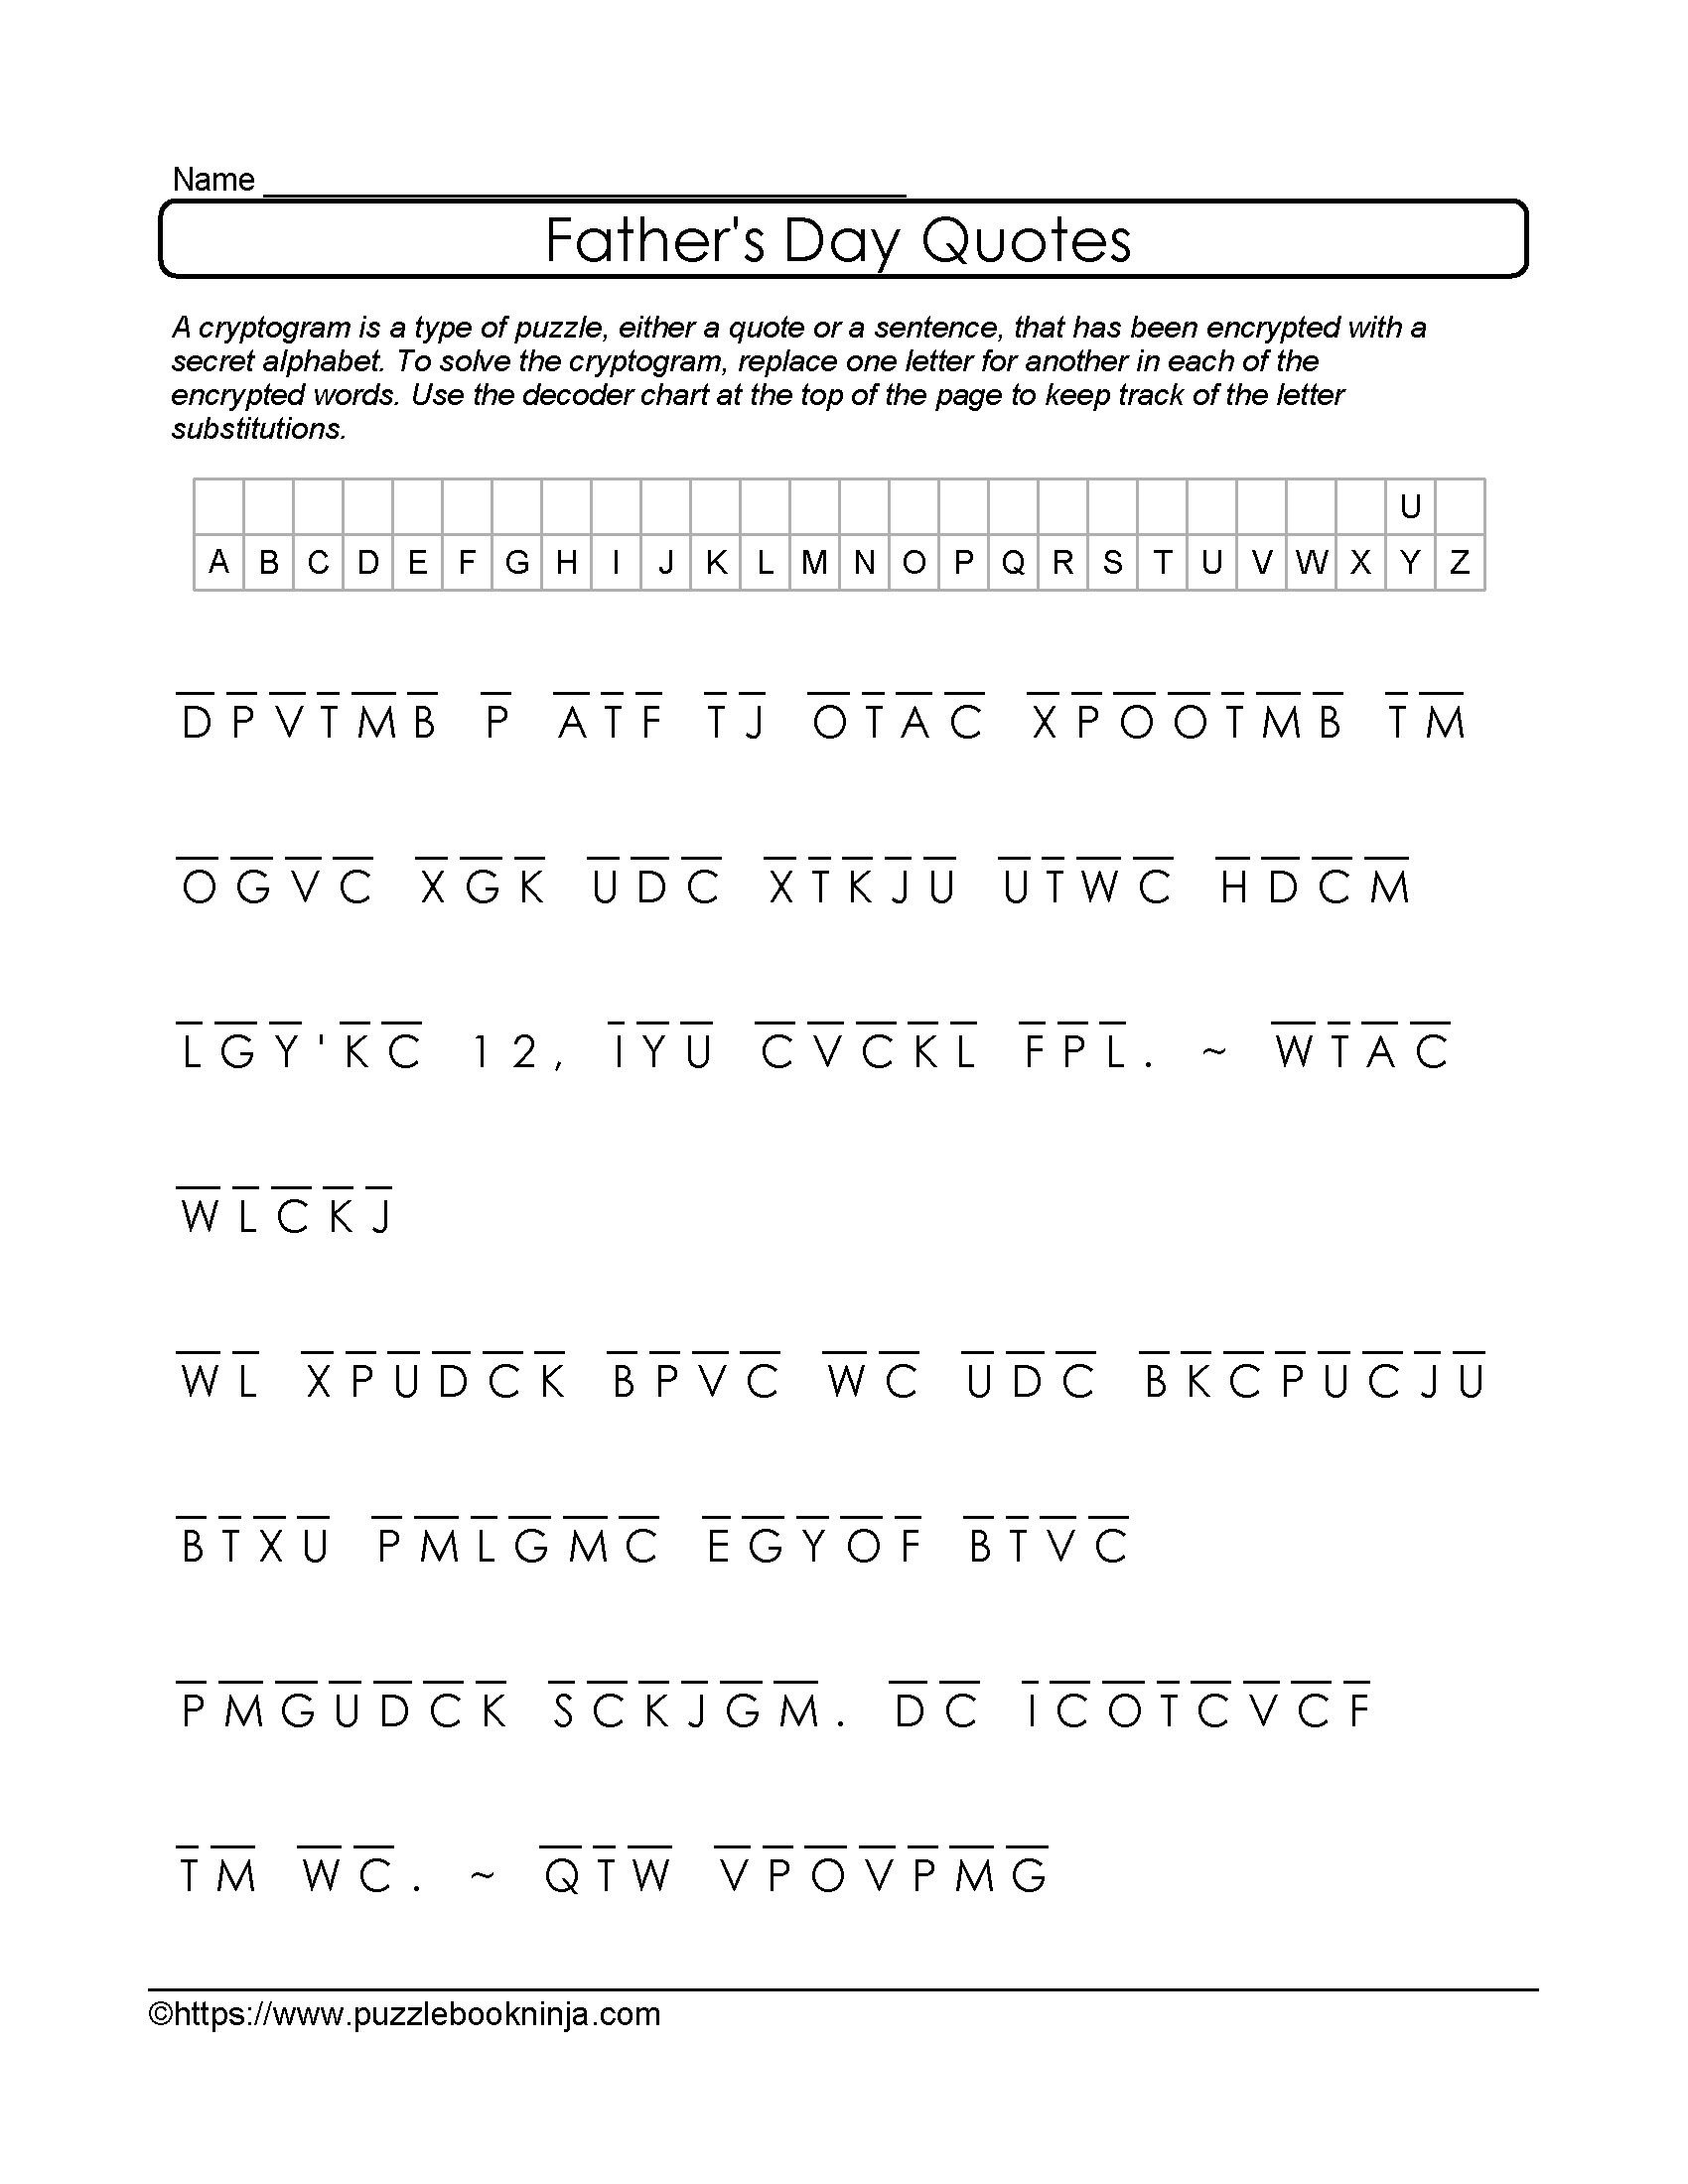 Free And Printable Father's Day Cryptogram. Quotes About Dad - Free Printable Cryptograms With Answers